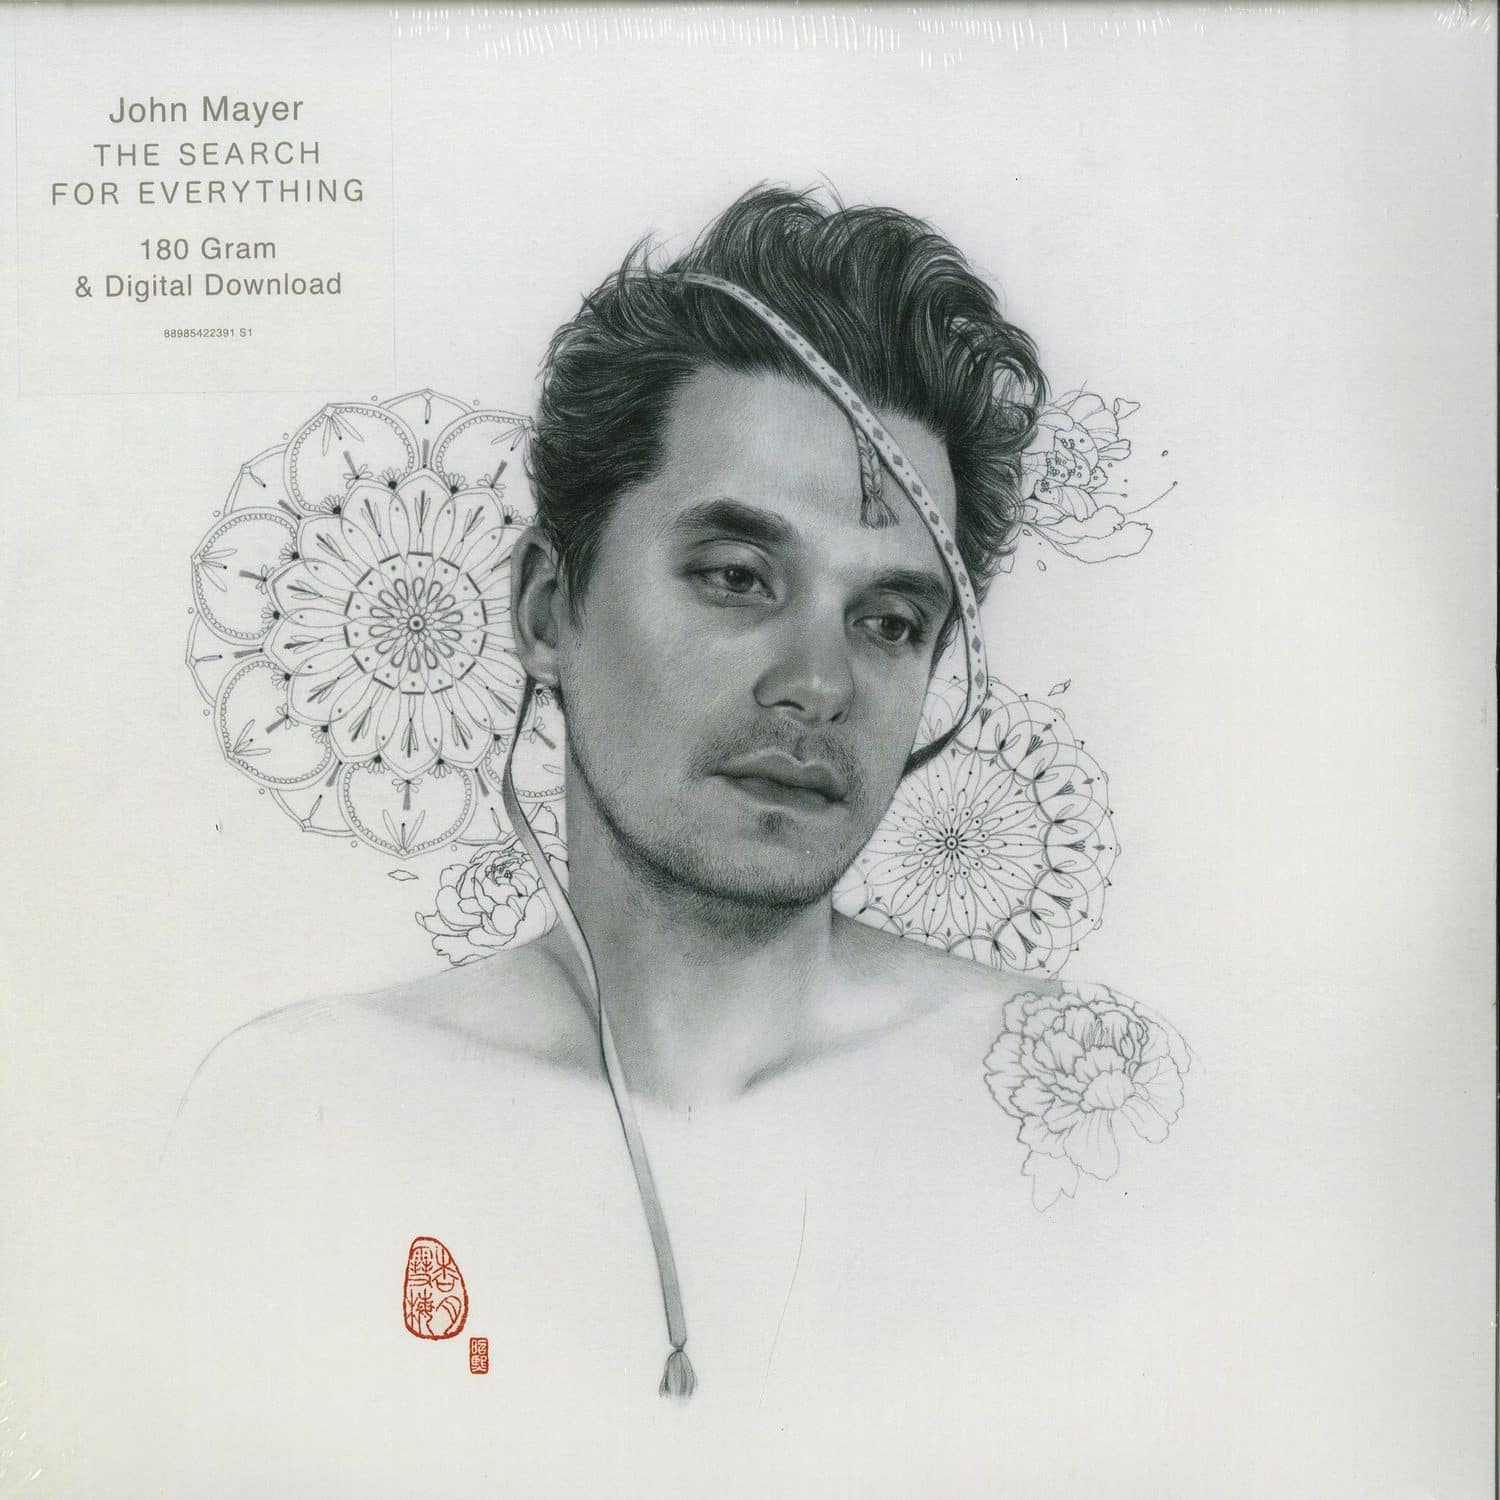 John Mayer - THE SEARCH FOR EVERYTHING 